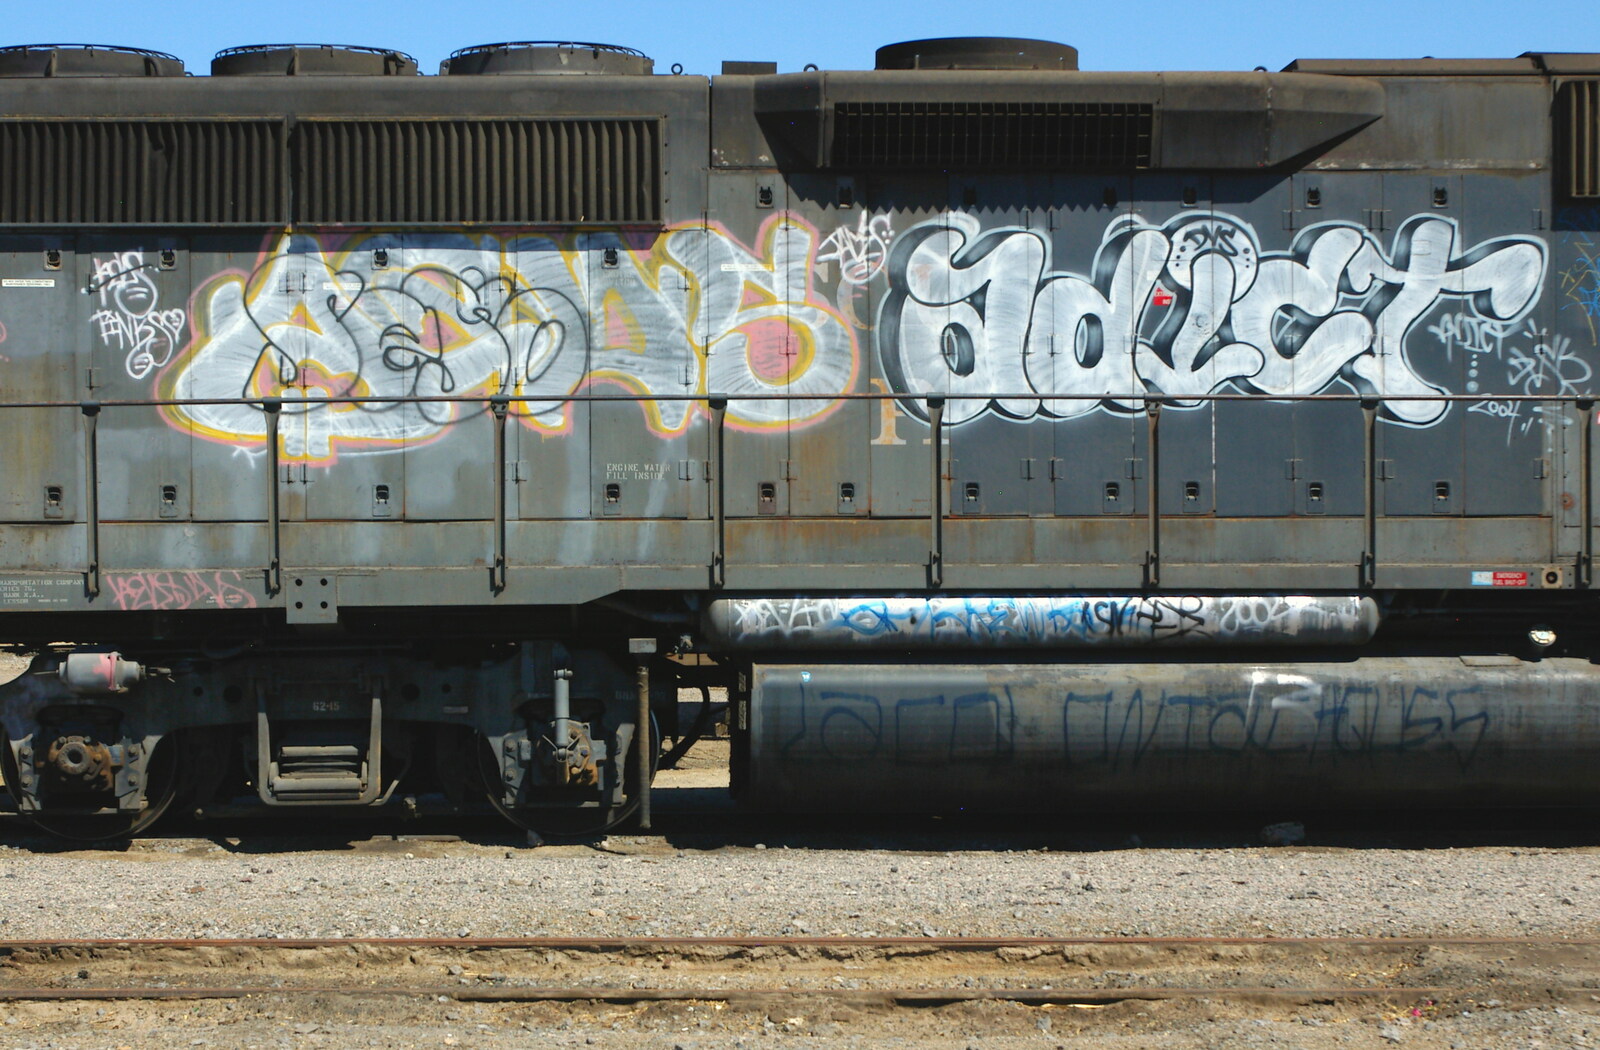 Graffiti tags on a locomotive from California Desert: El Centro, Imperial Valley, California, US - 24th September 2005